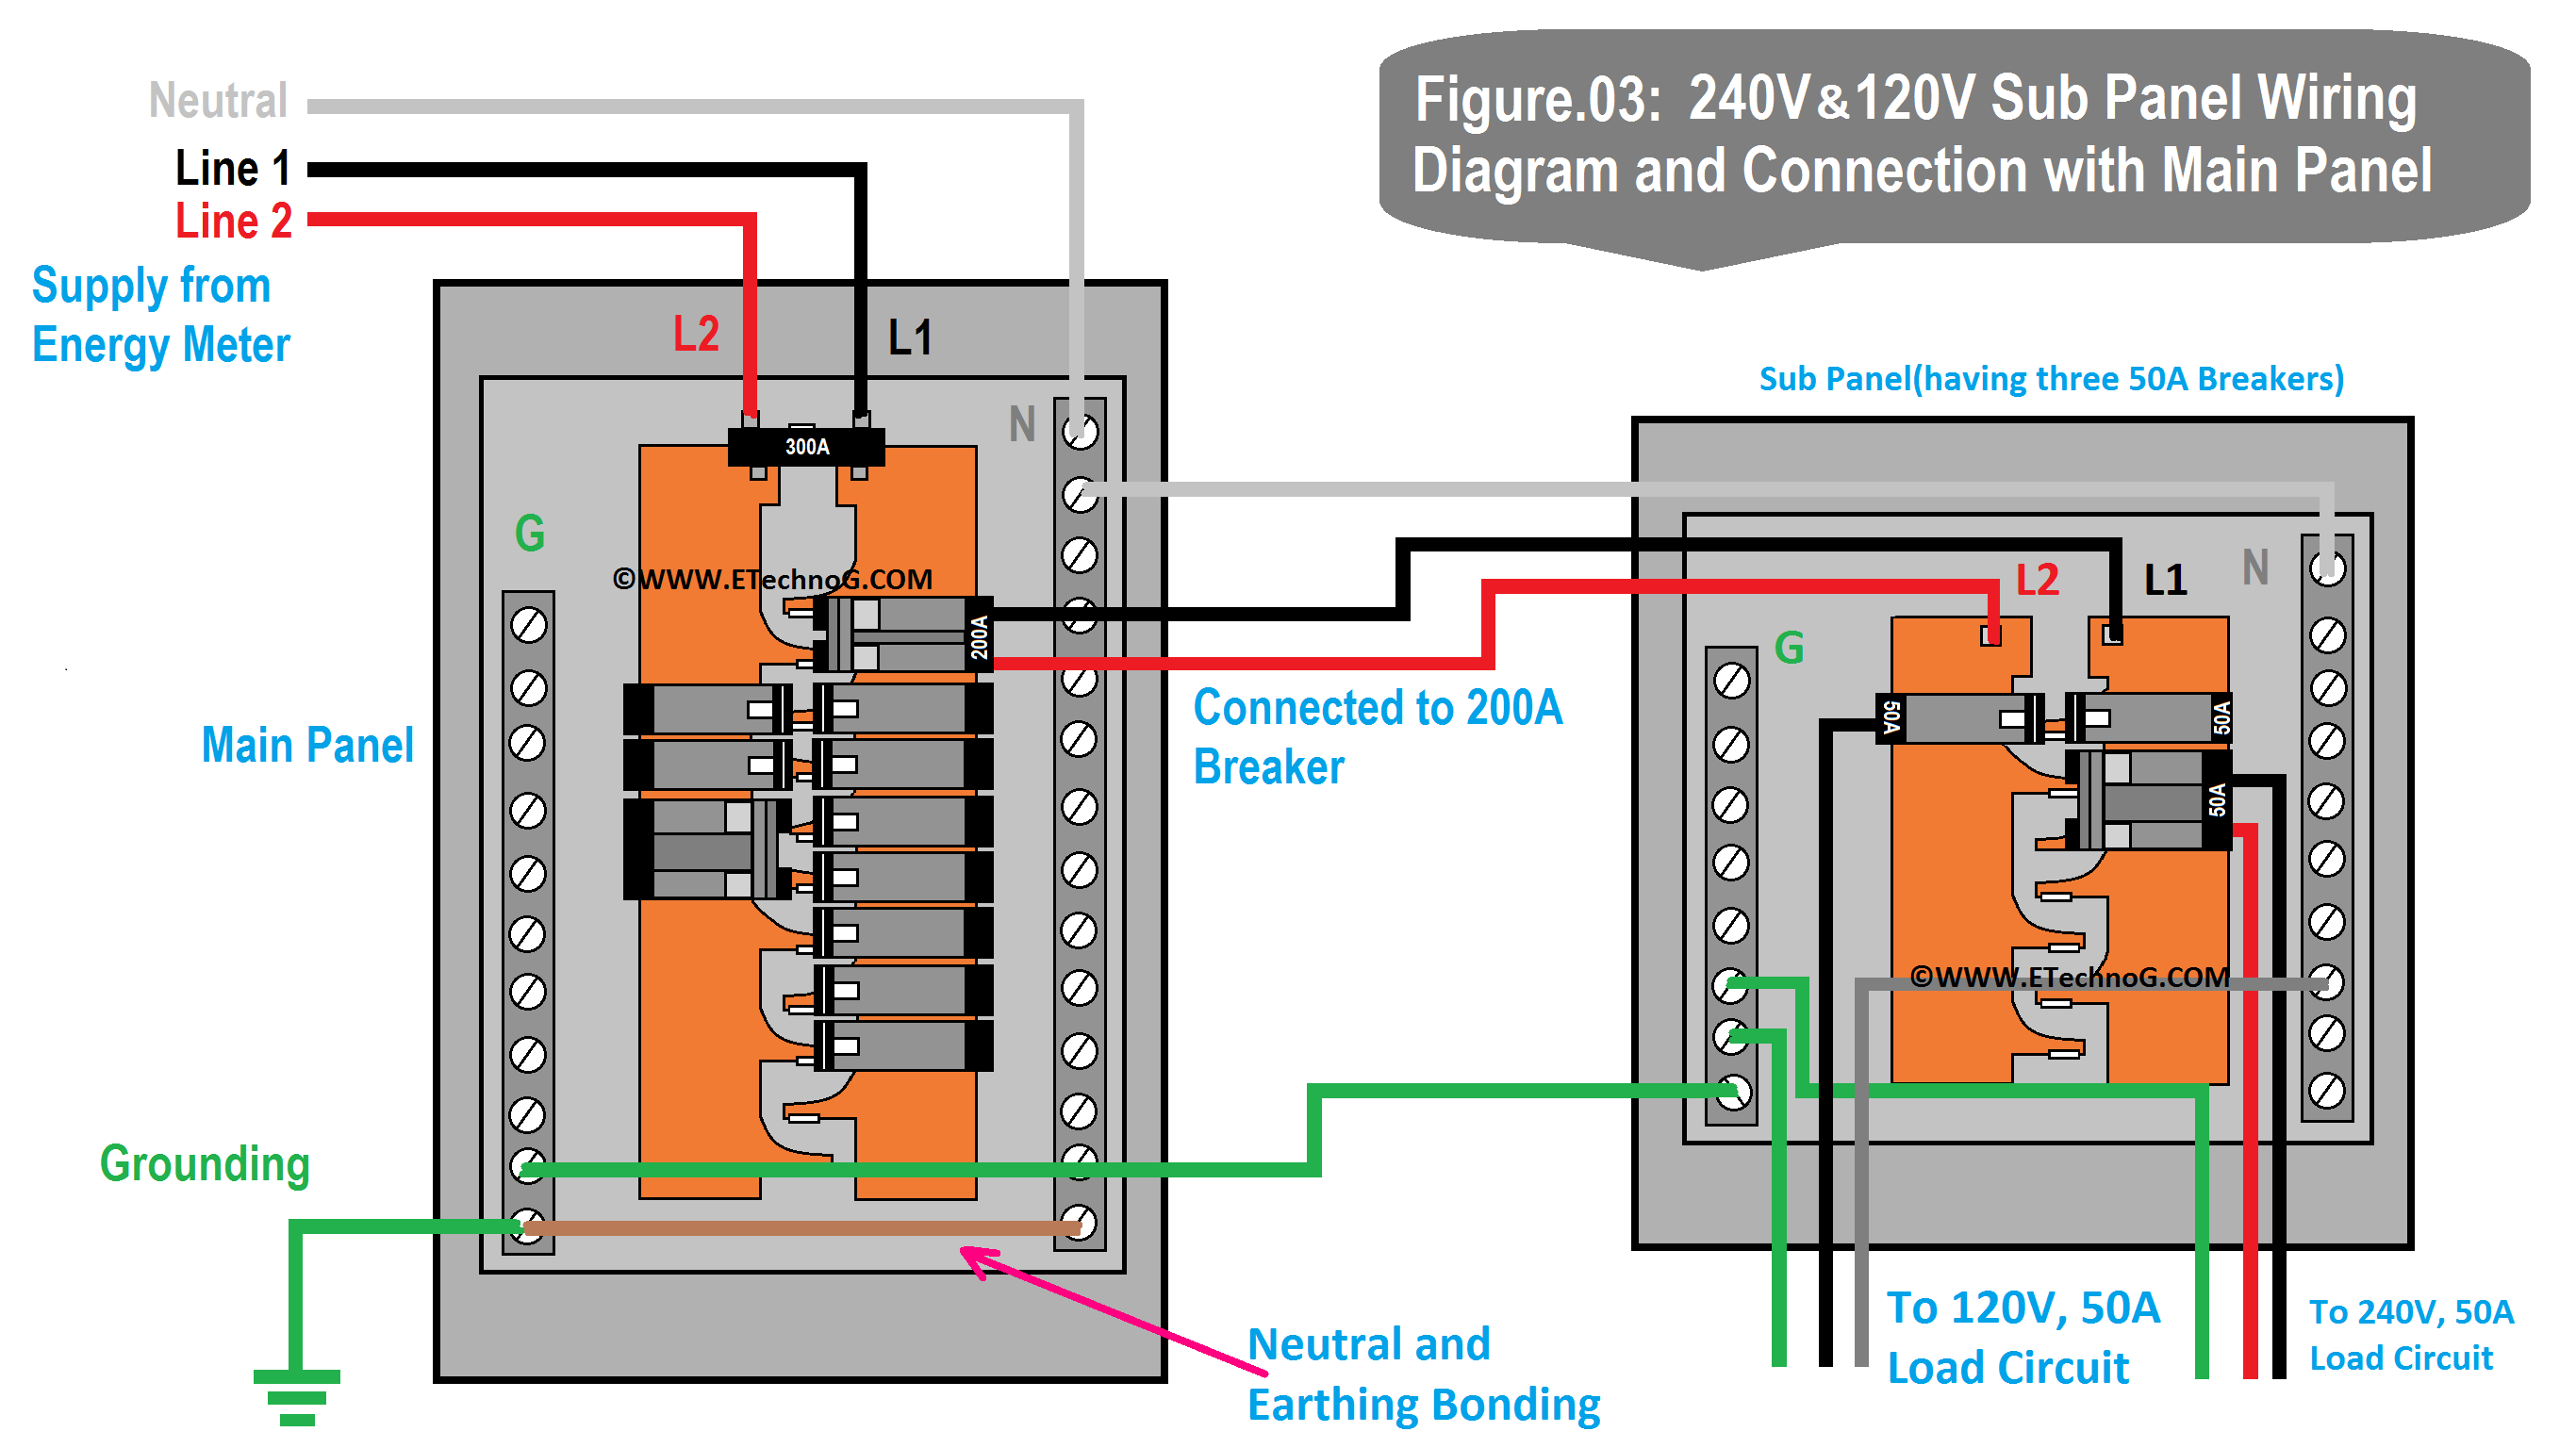 240V and 120V Sub Panel Wiring Diagram and Connection with main panel